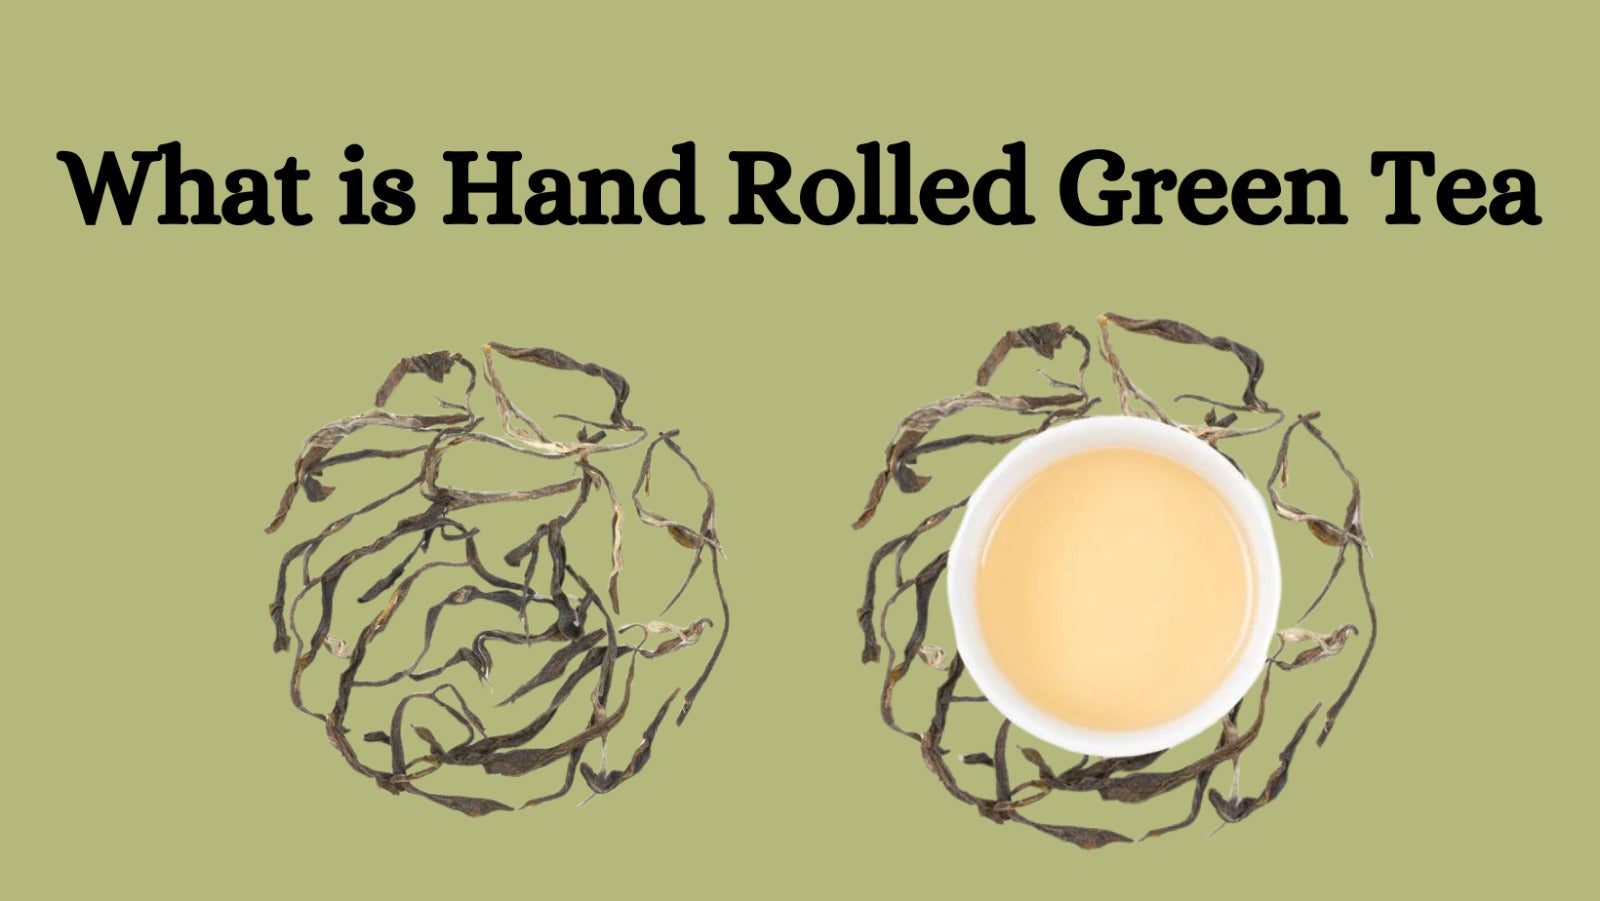 What is Hand Rolled Green Tea